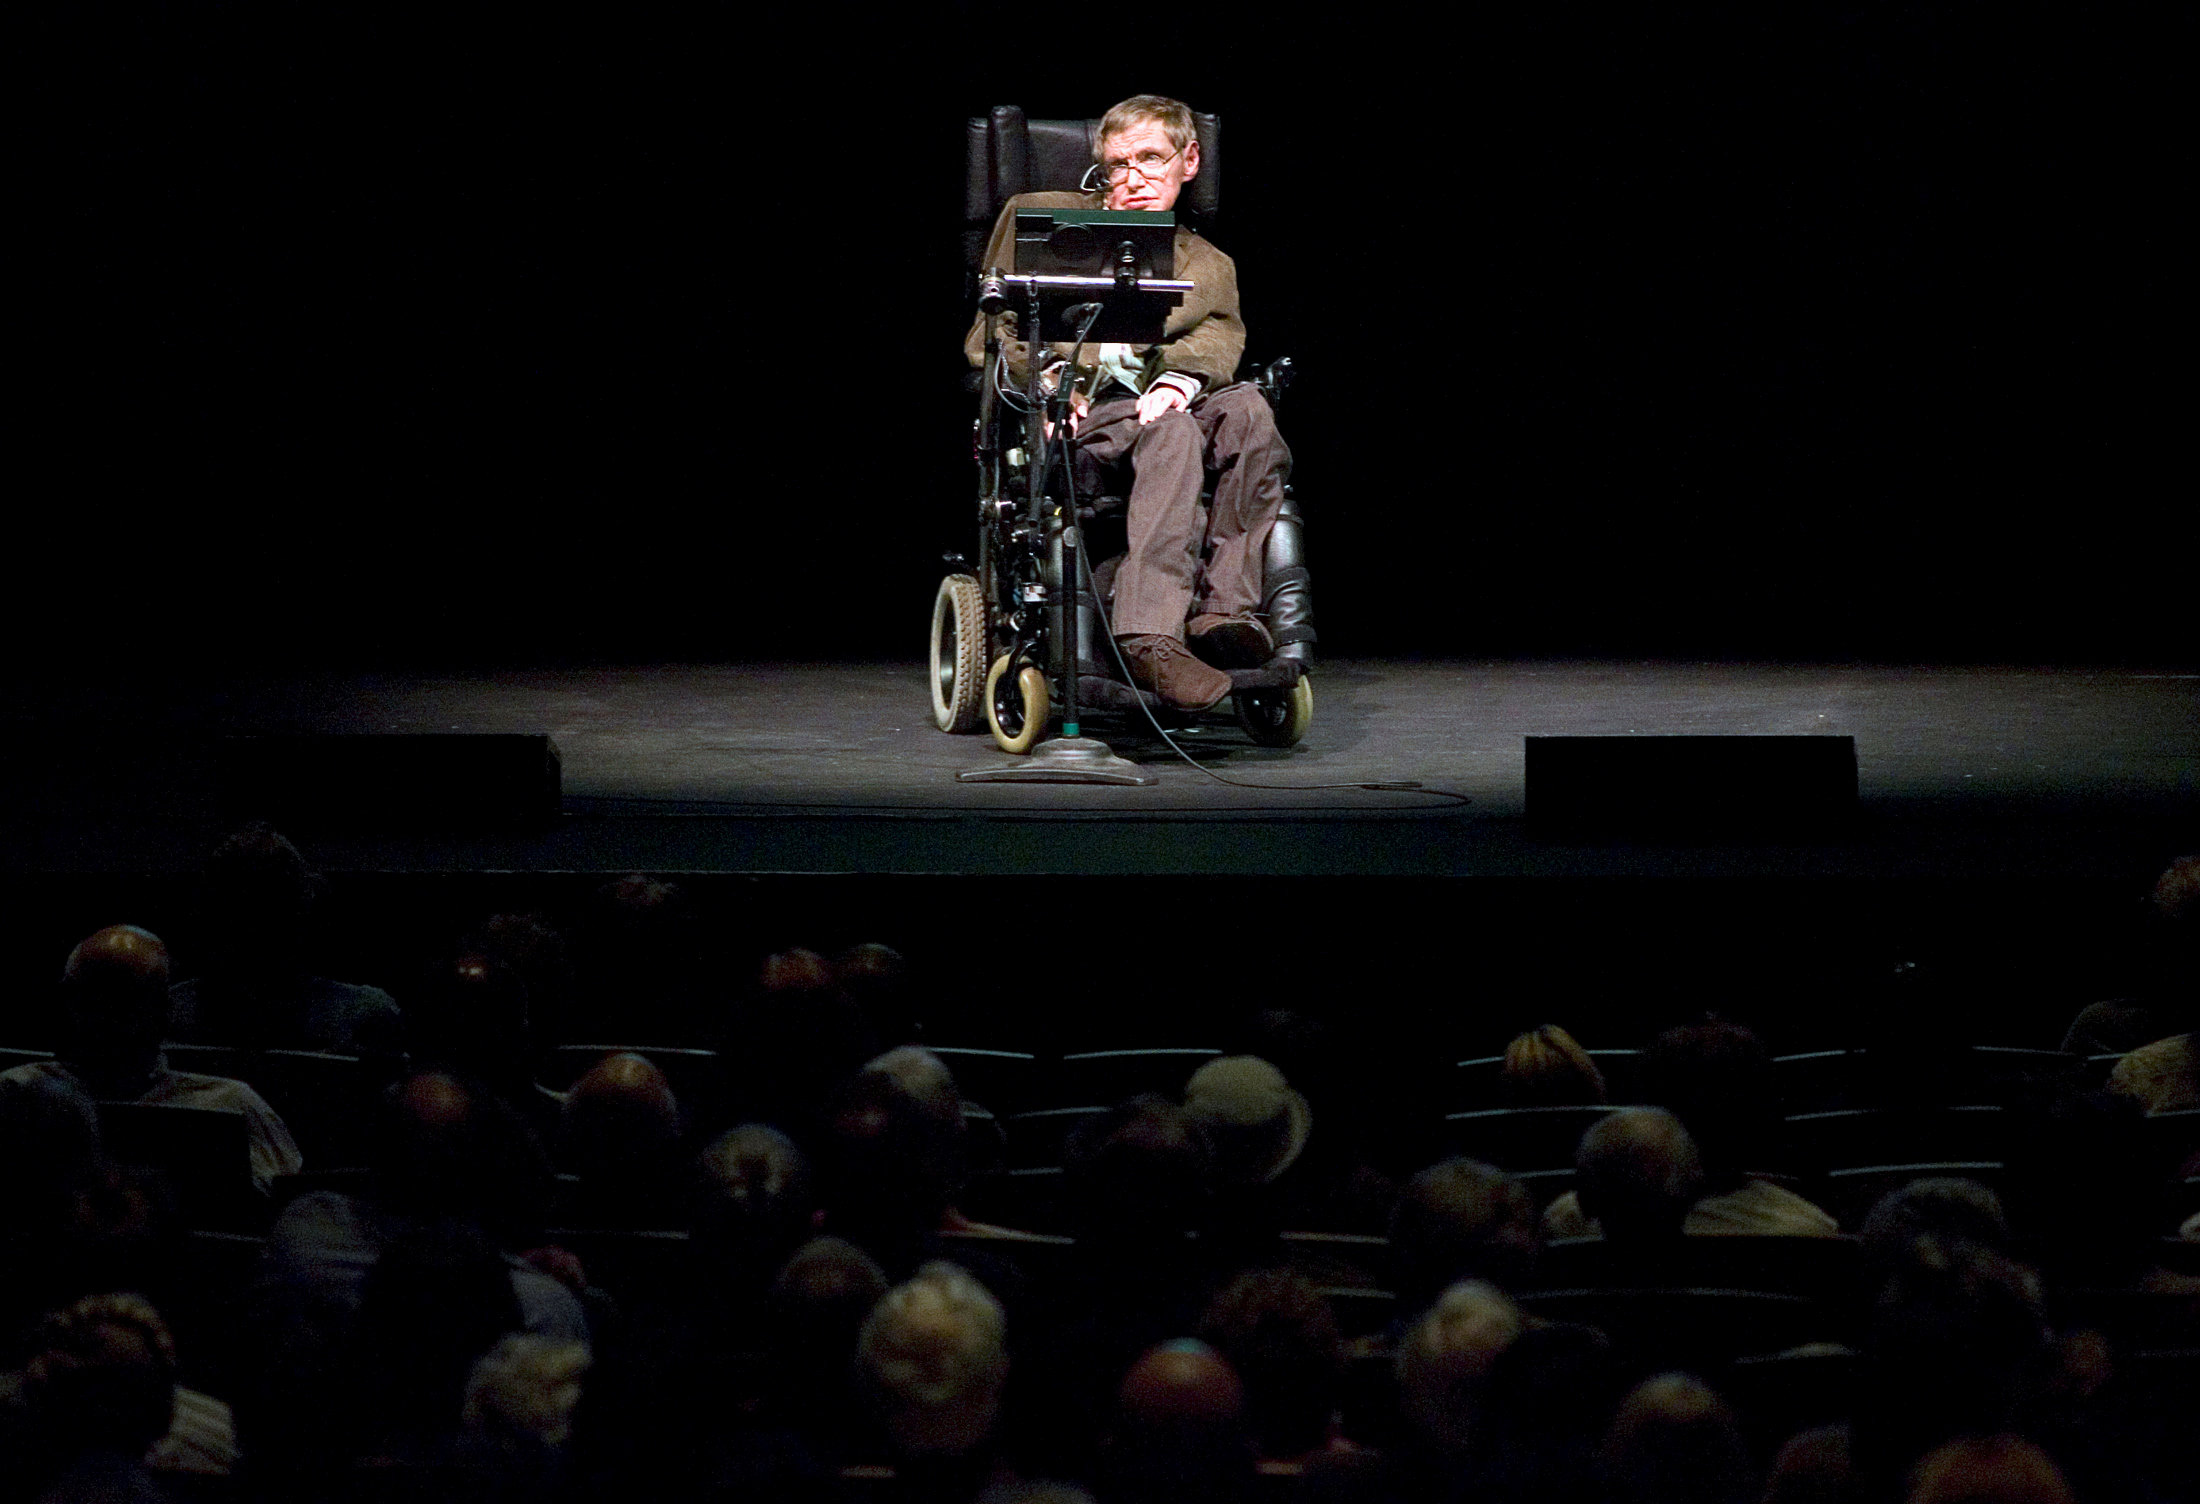 Professor of mathematics at Cambridge University Stephen W. Hawking discusses theories on the origin of the universe in a talk in Berkeley, California, March 13, 2007. Photo: Reuters